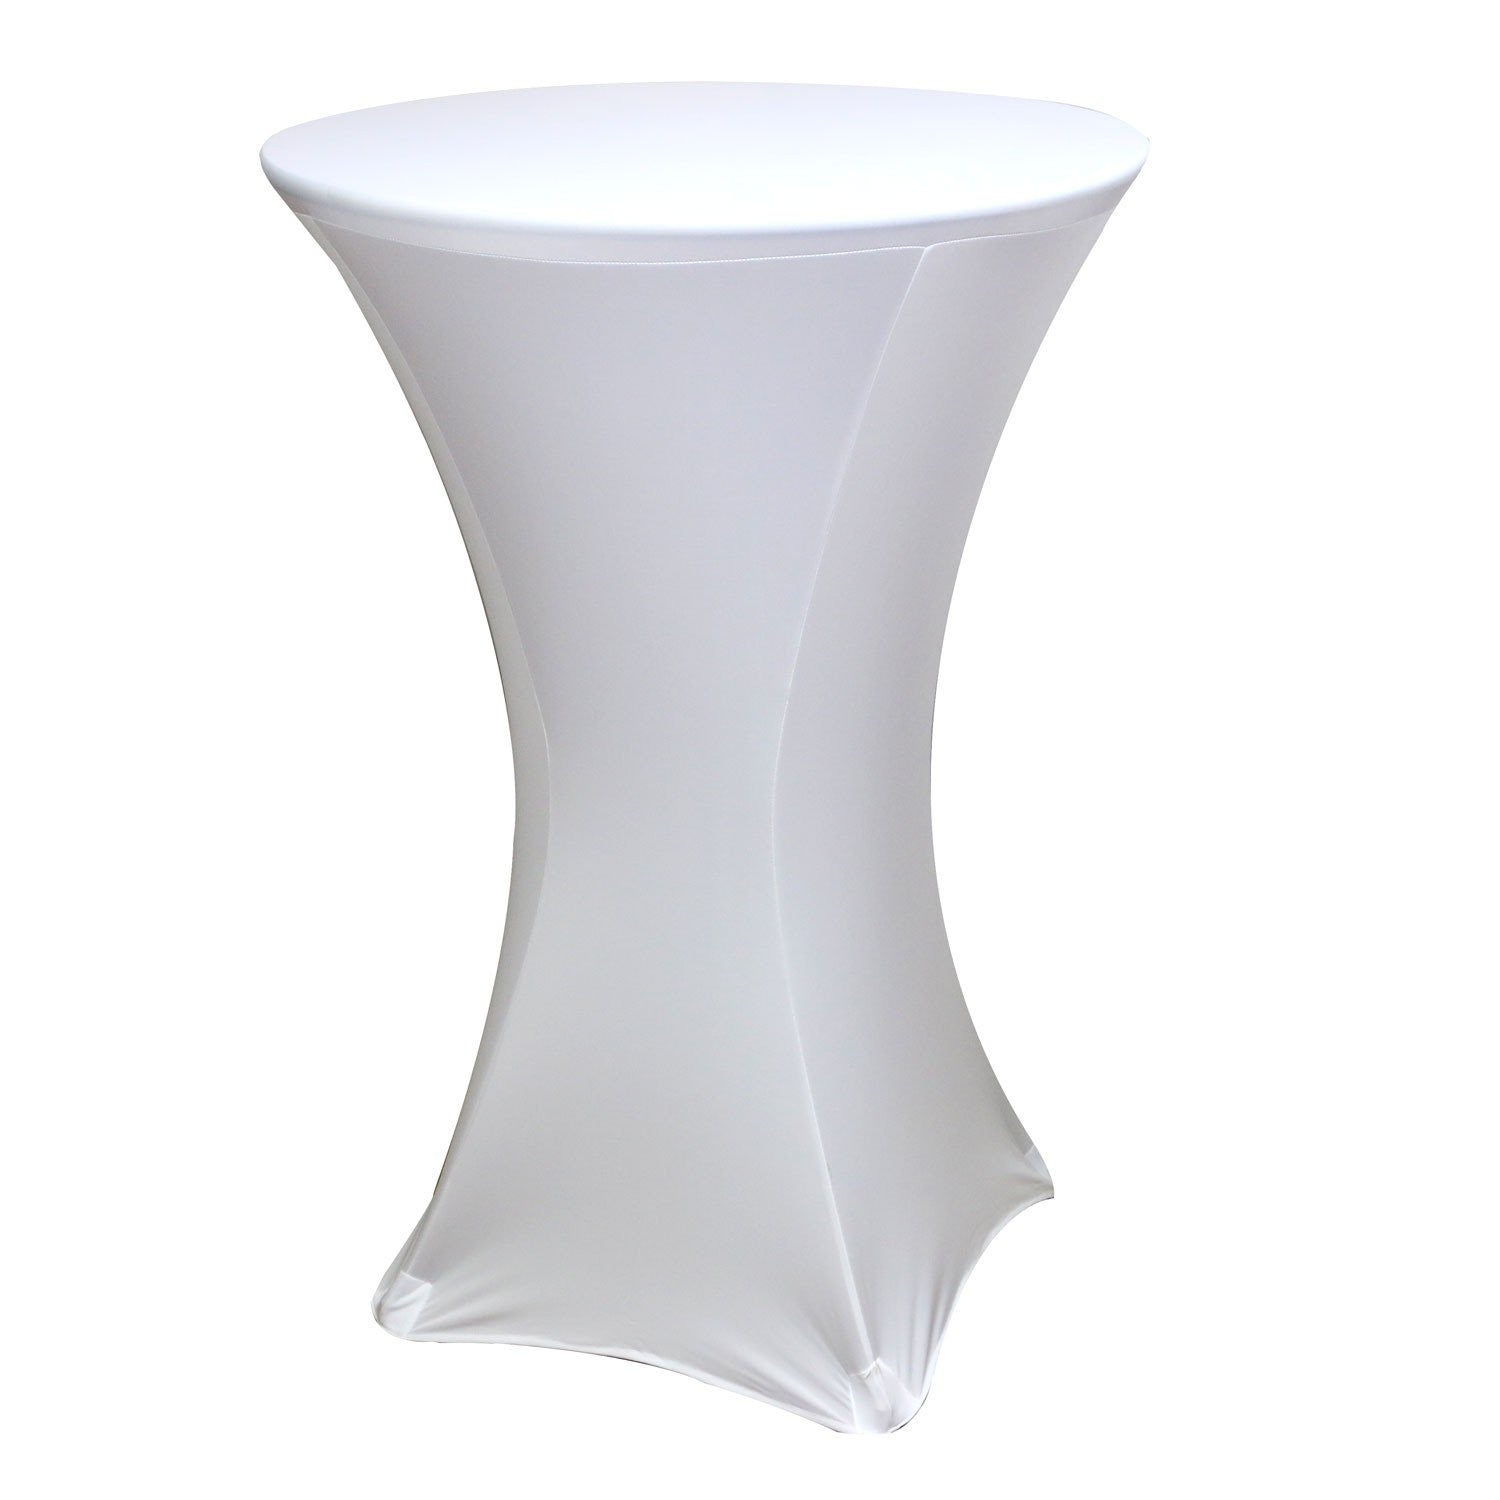 Spandex High Boy Table Cover White